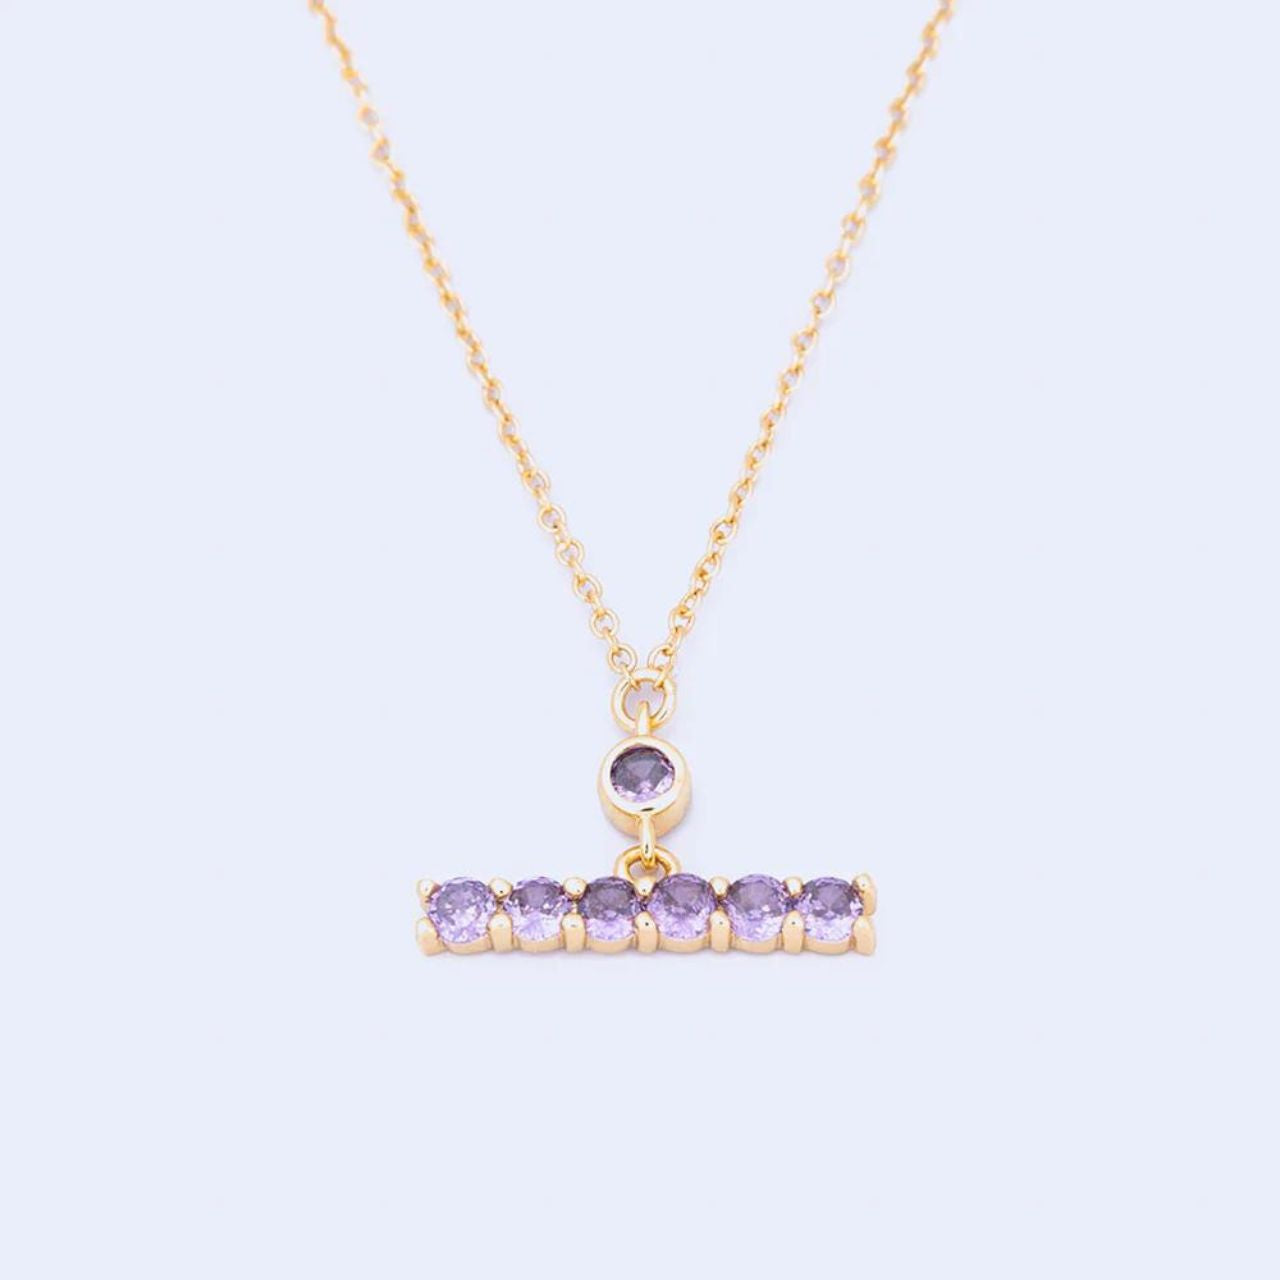 Knight & Day Amethyst T-Bar Necklace  T-Bar necklace embellished with amethyst CZ stones. Gold plating.  Length 42 + 5cm extension.